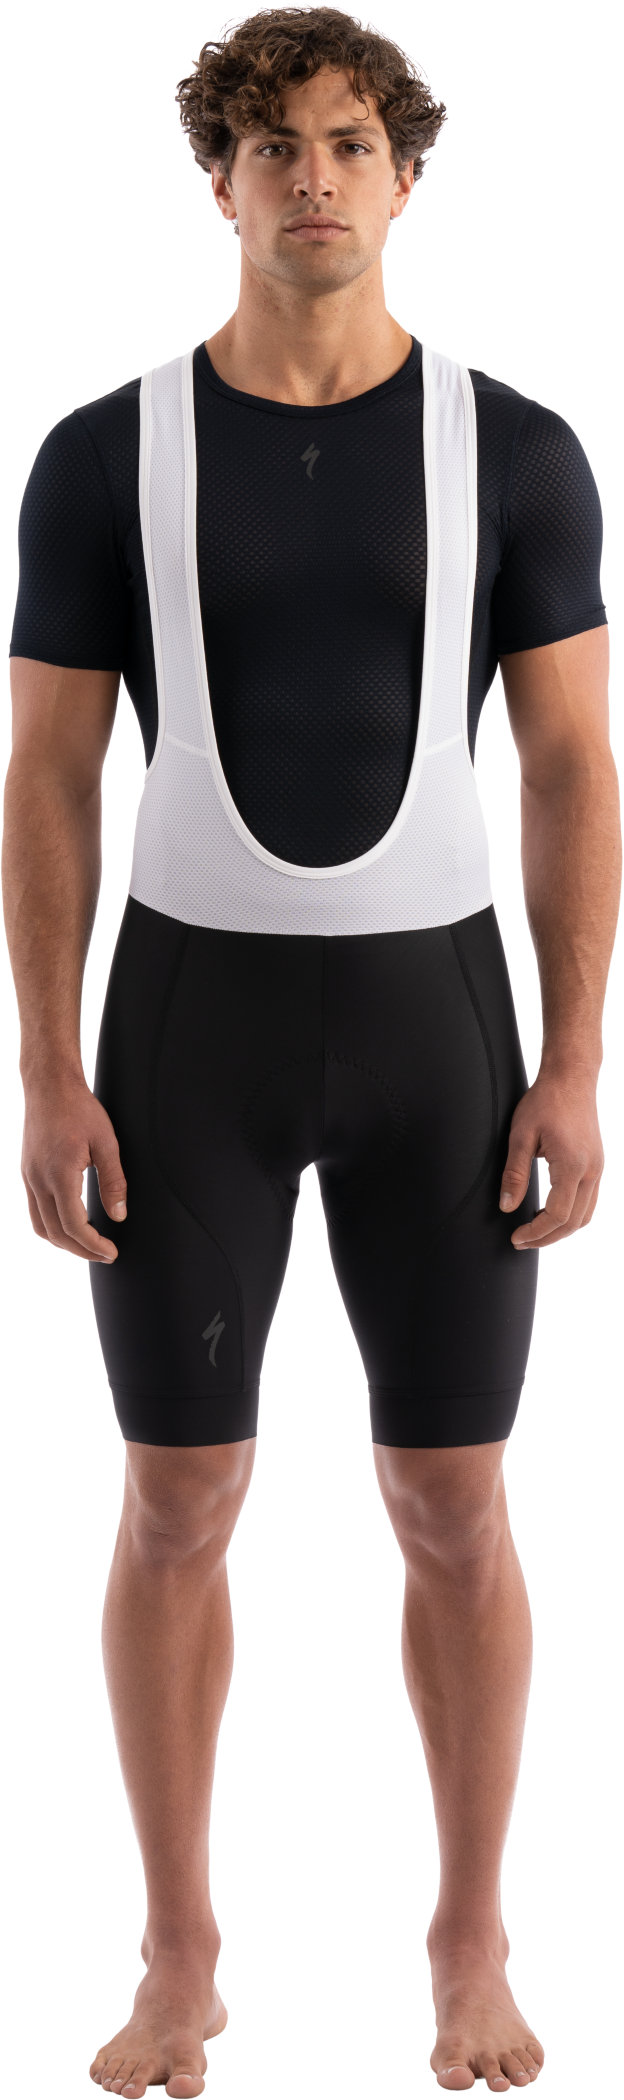 specialized men's cycling shorts